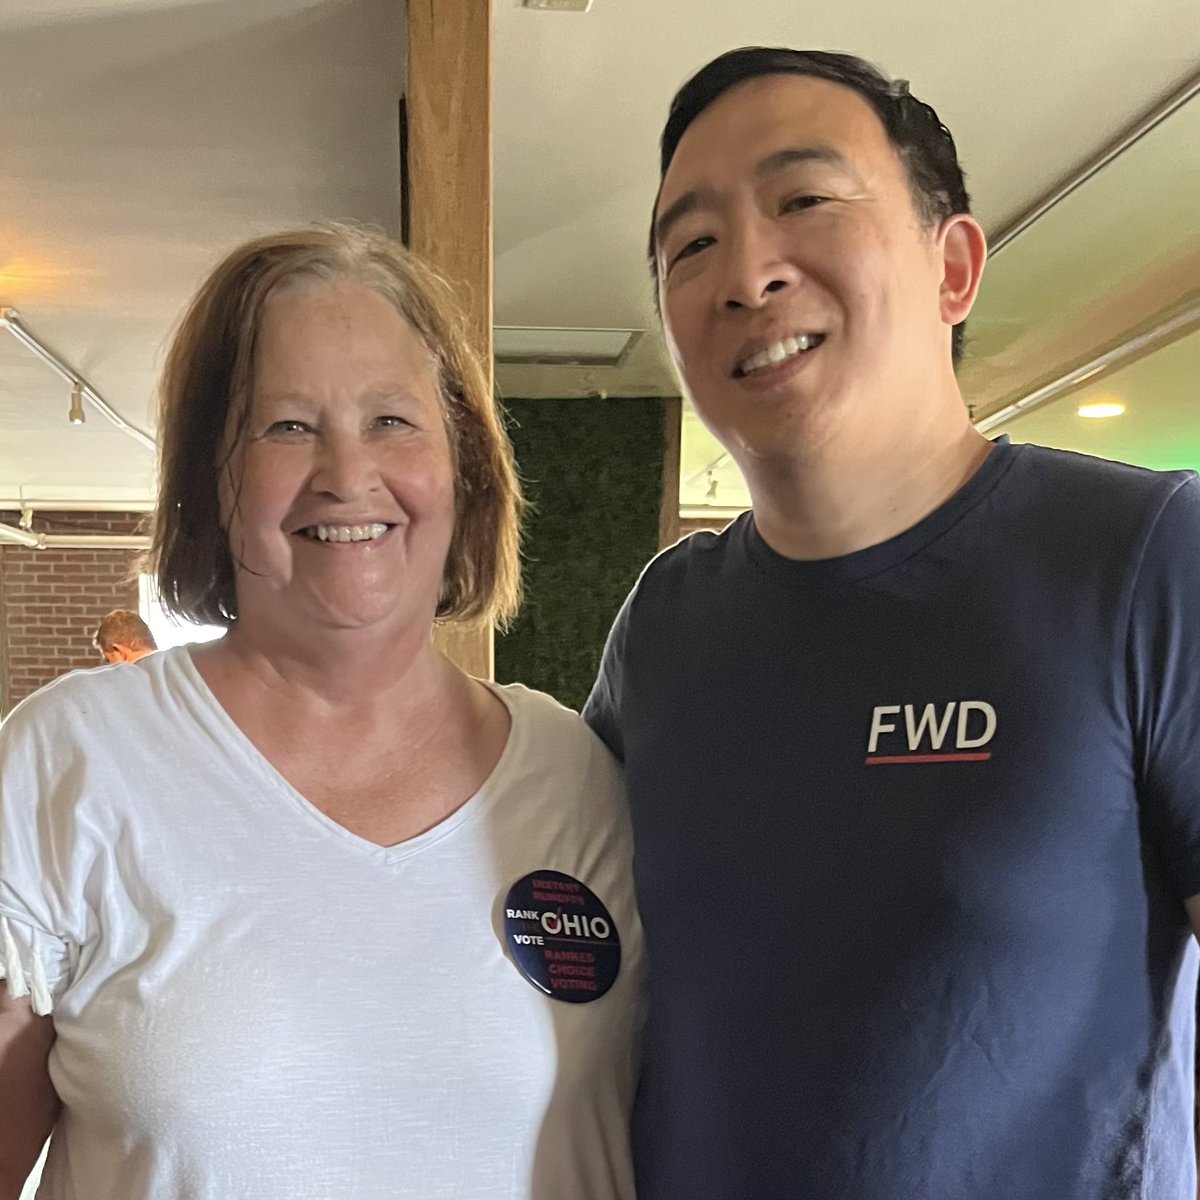 Thank you @AndrewYang for giving us a huge shoutout during your visit with @Fwd_Ohio in #Columbus! Our Organizer for #CentralOhio, Debbie Schaffner, got to thank Andrew Yang for endorsing our effort for #RankedChoiceVoting in #Ohio so that @Fwd_Party and more parties can compete! https://t.co/cxCPY2JQyt